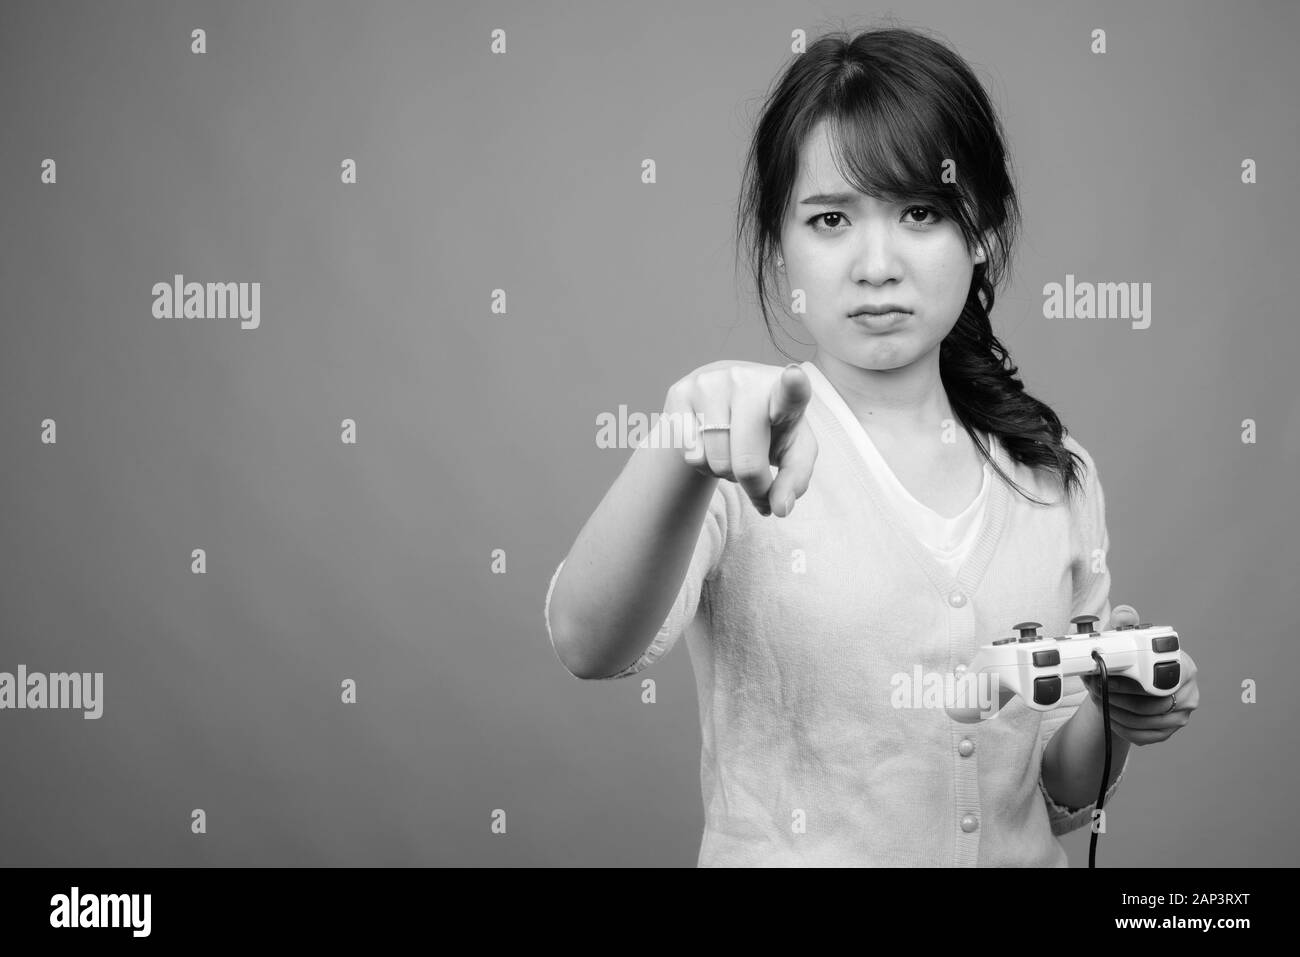 Young beautiful Asian woman playing games against gray background Stock Photo